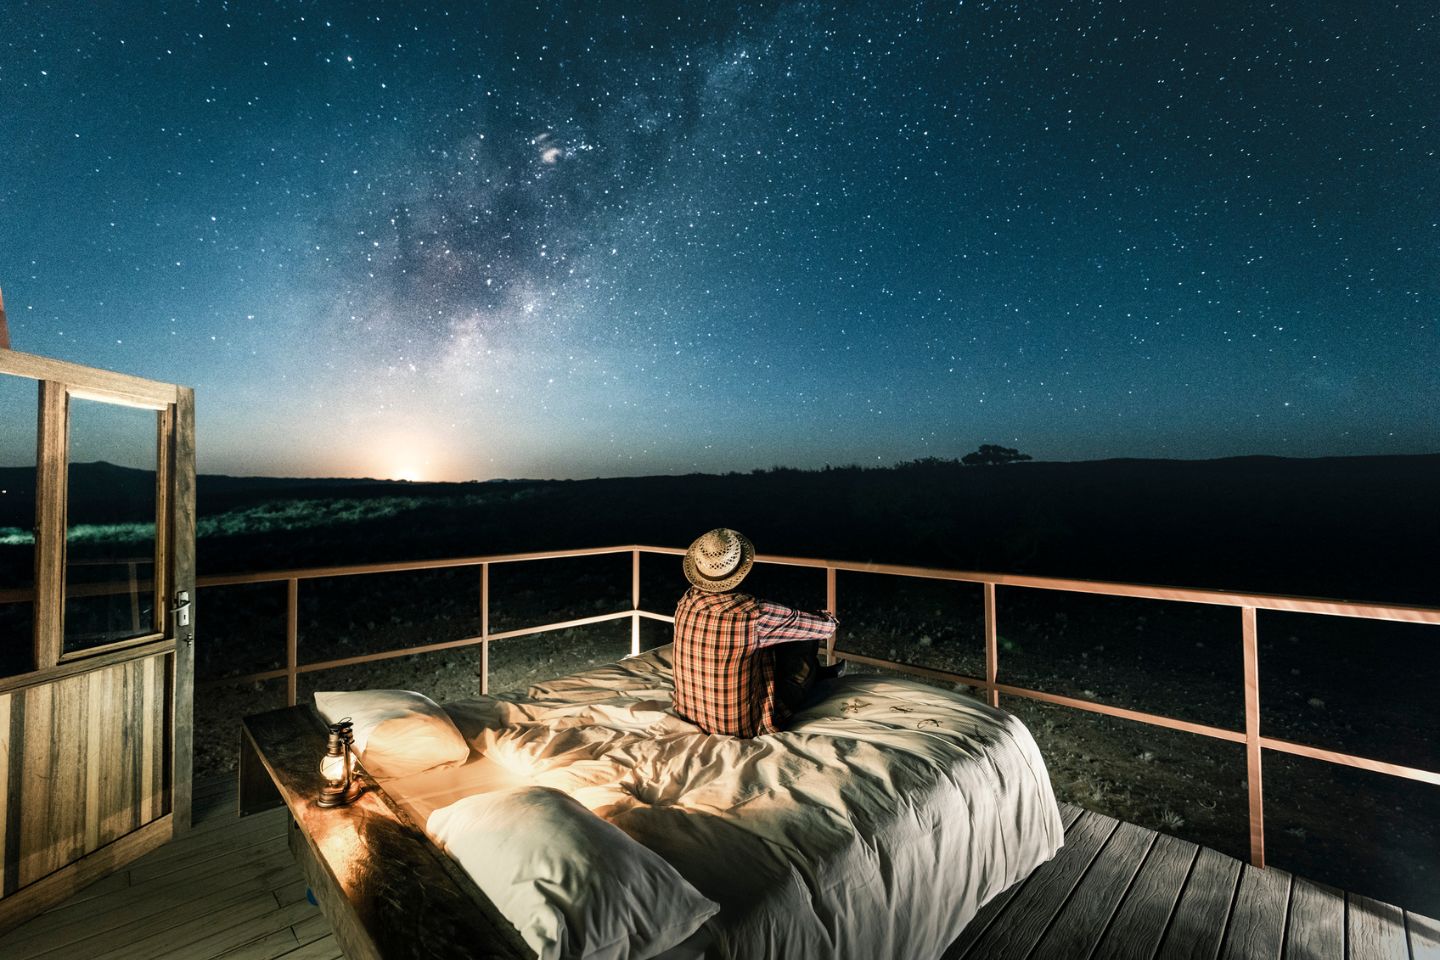 Astro-Tourism is Travel's Latest Trend, Here's Why